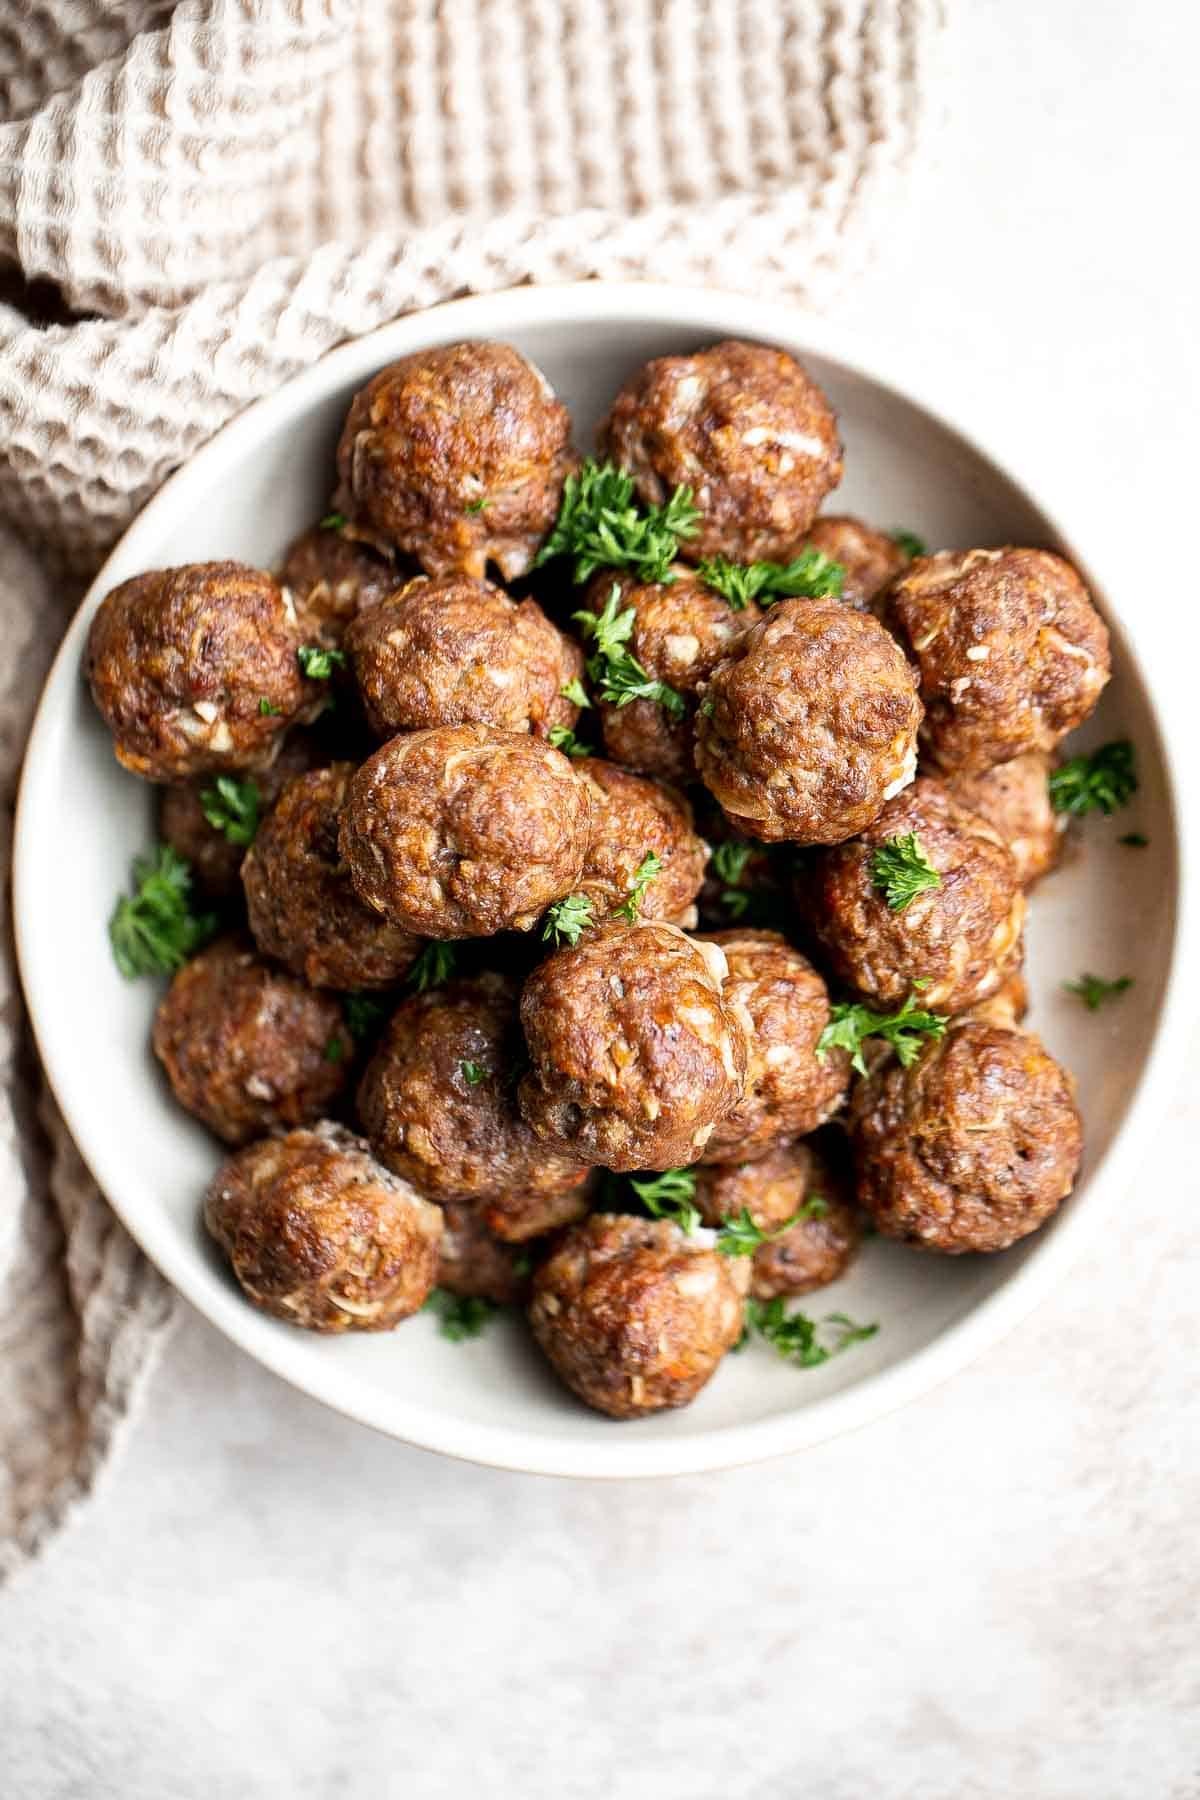 Easy Baked Meatballs are juicy, tender, loaded with flavor, and kid-friendly. Enjoy delicious homemade meatballs in under an hour using simple ingredients. | aheadofthyme.com